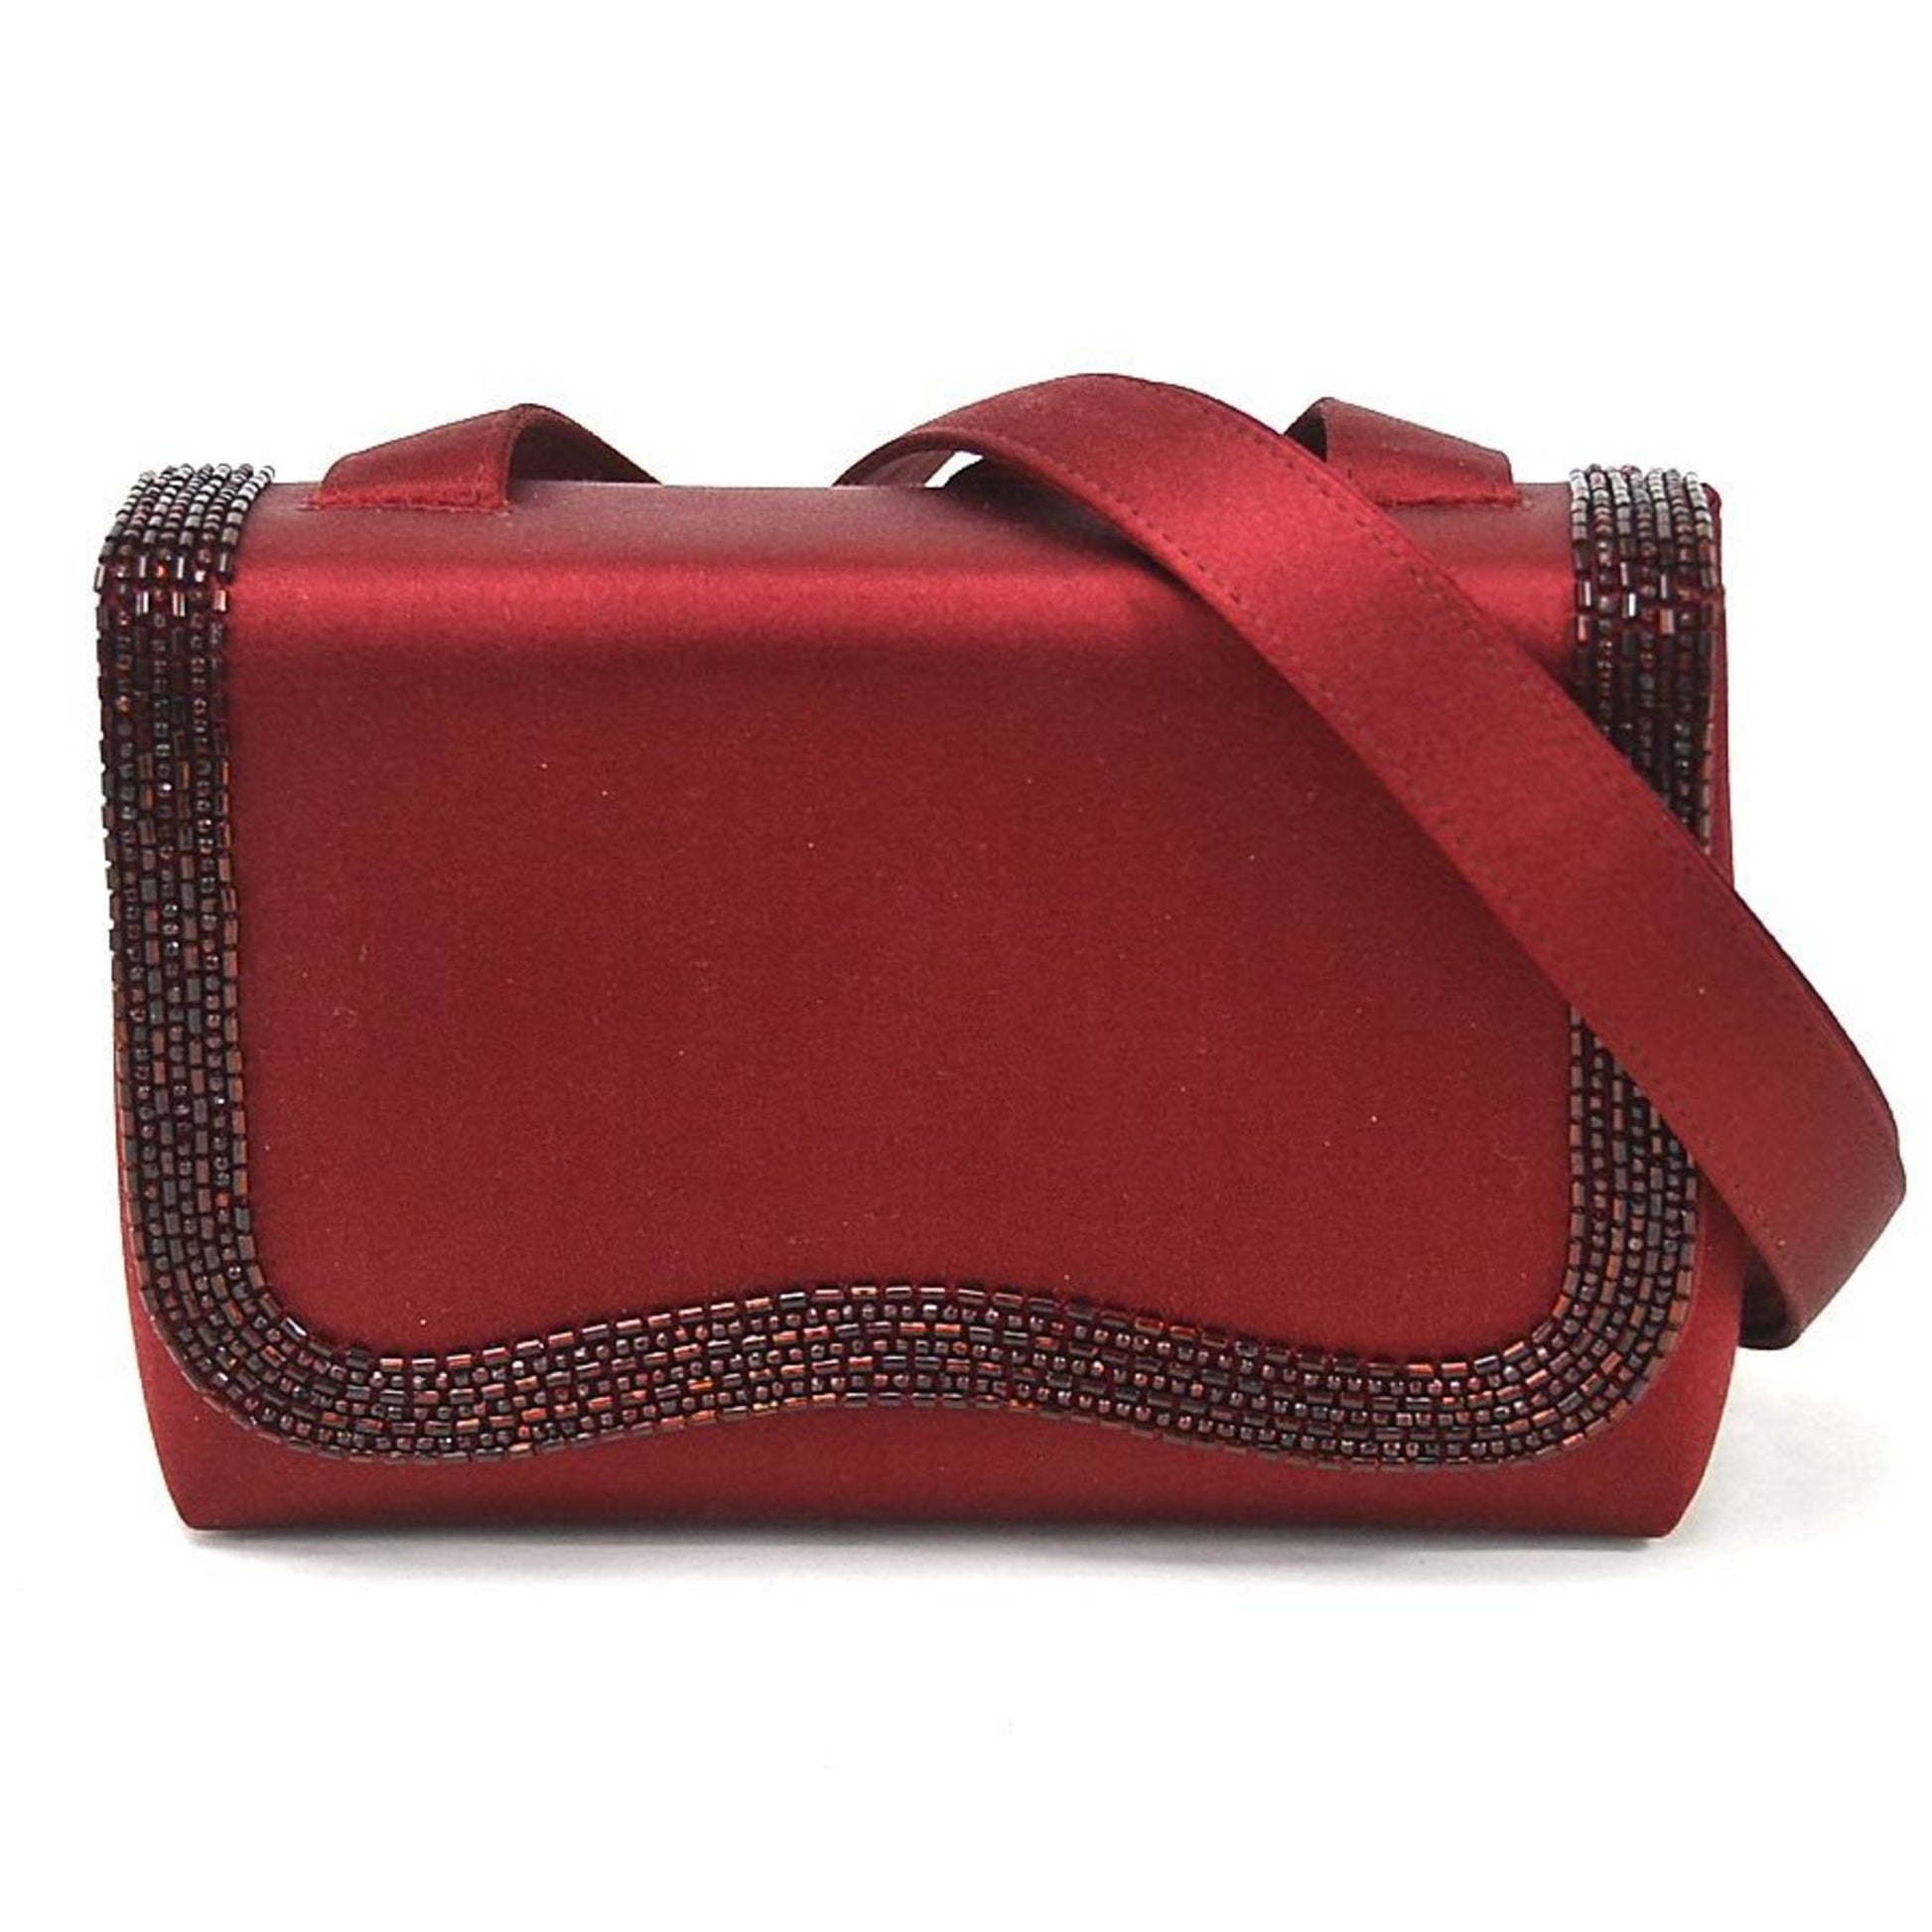 Chanel Shoulder Bag Diagonal Coco Mark Wine Red Satin x Beads